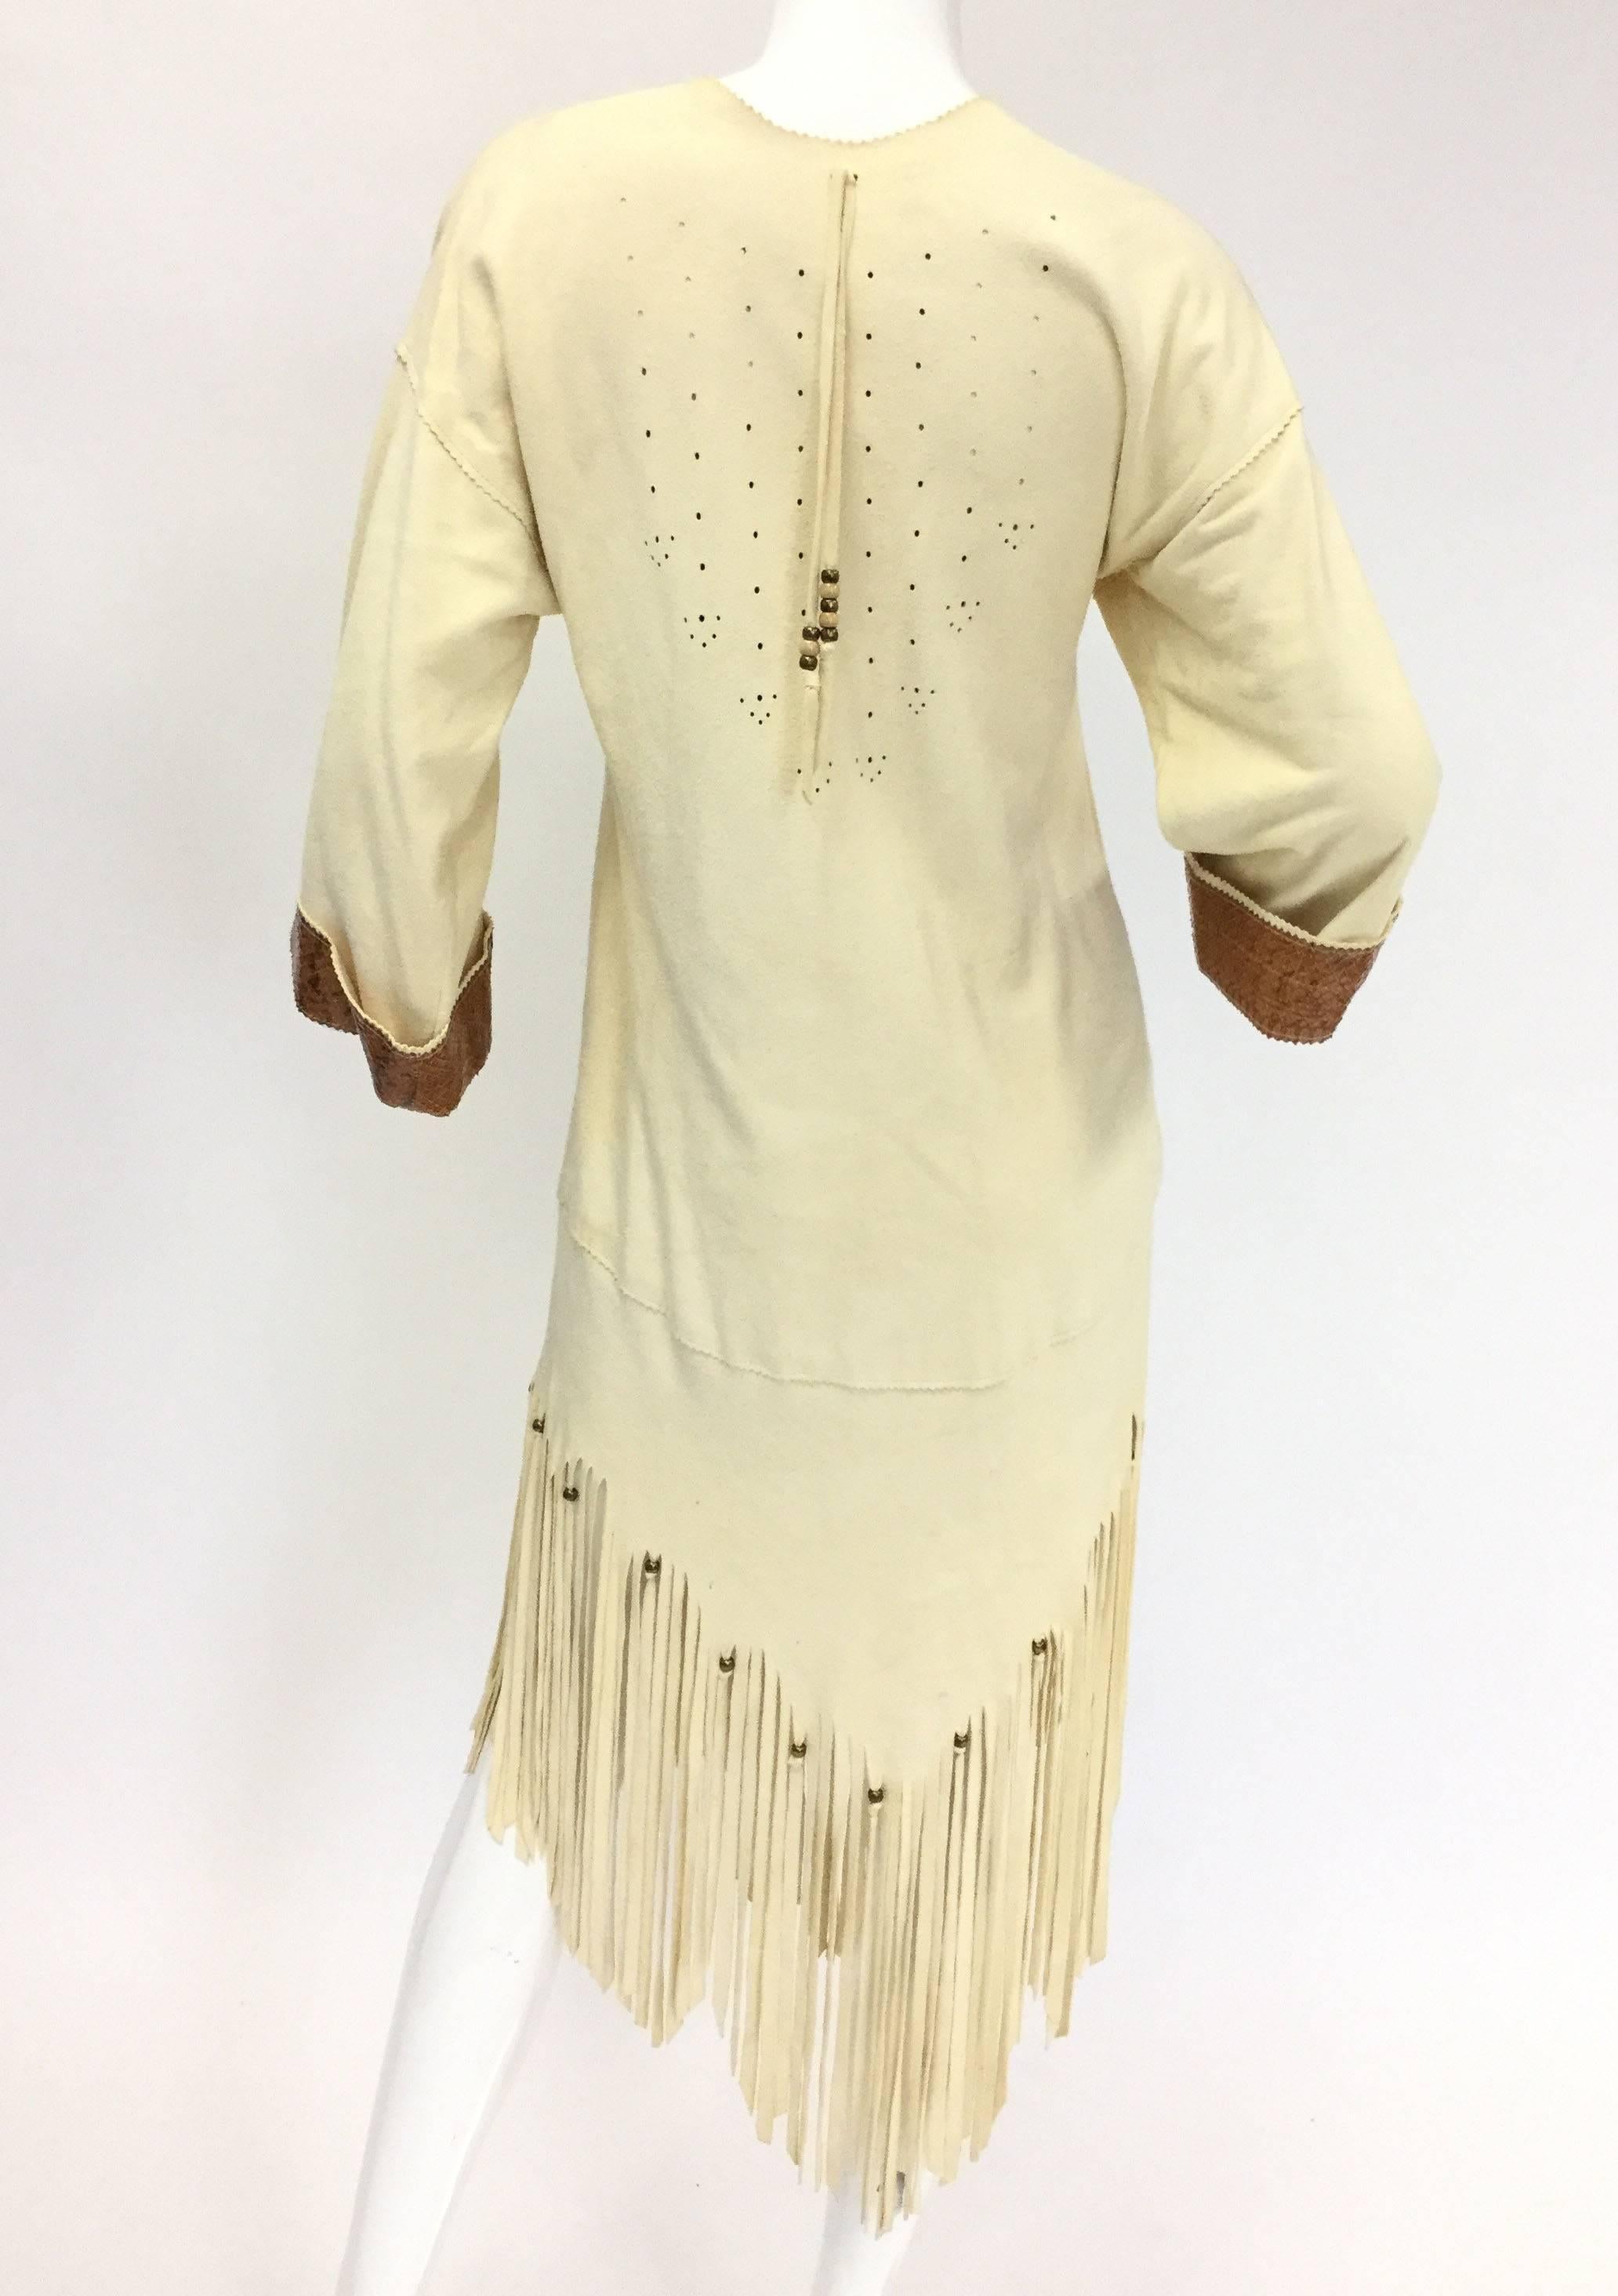 
This modern reinterpretation of the buckskin dress is absolutely striking! The light ecru chamois dress features caramel snakeskin detailing on the cuffs and collar, as well as a long fringed hem in an inverted triangle pattern. The fringe and the